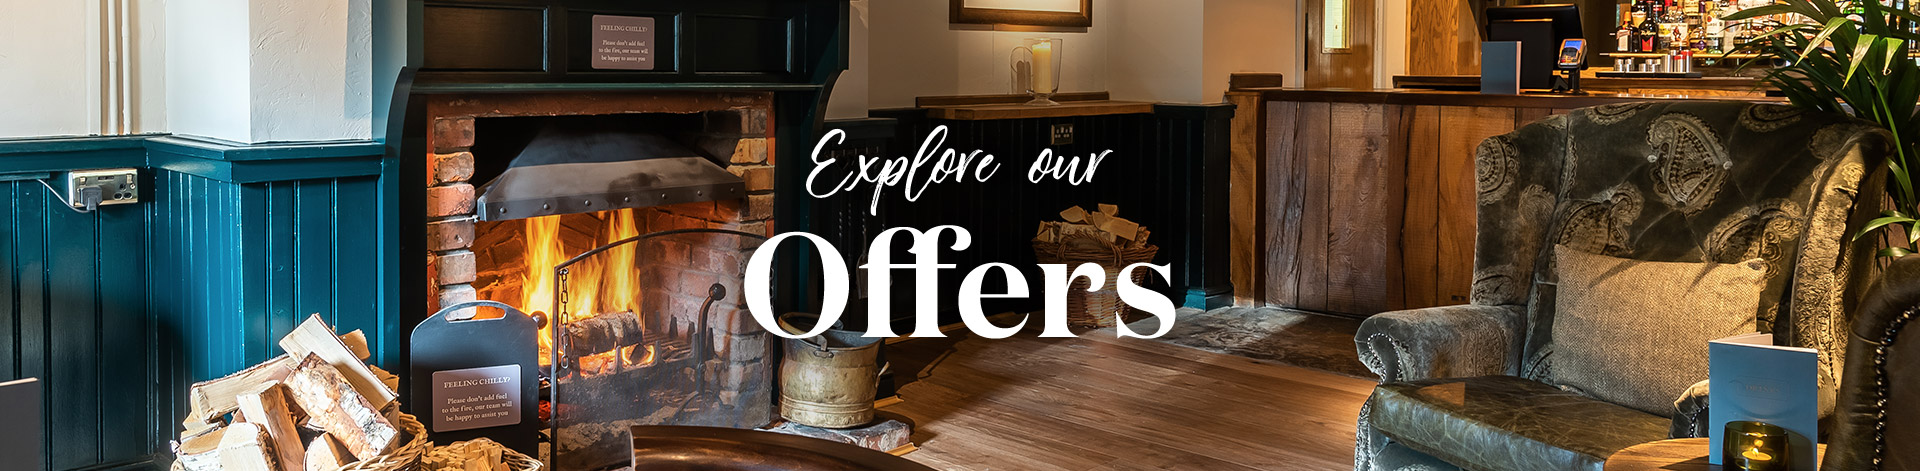 Our latest offers at The Crown, Ardleigh